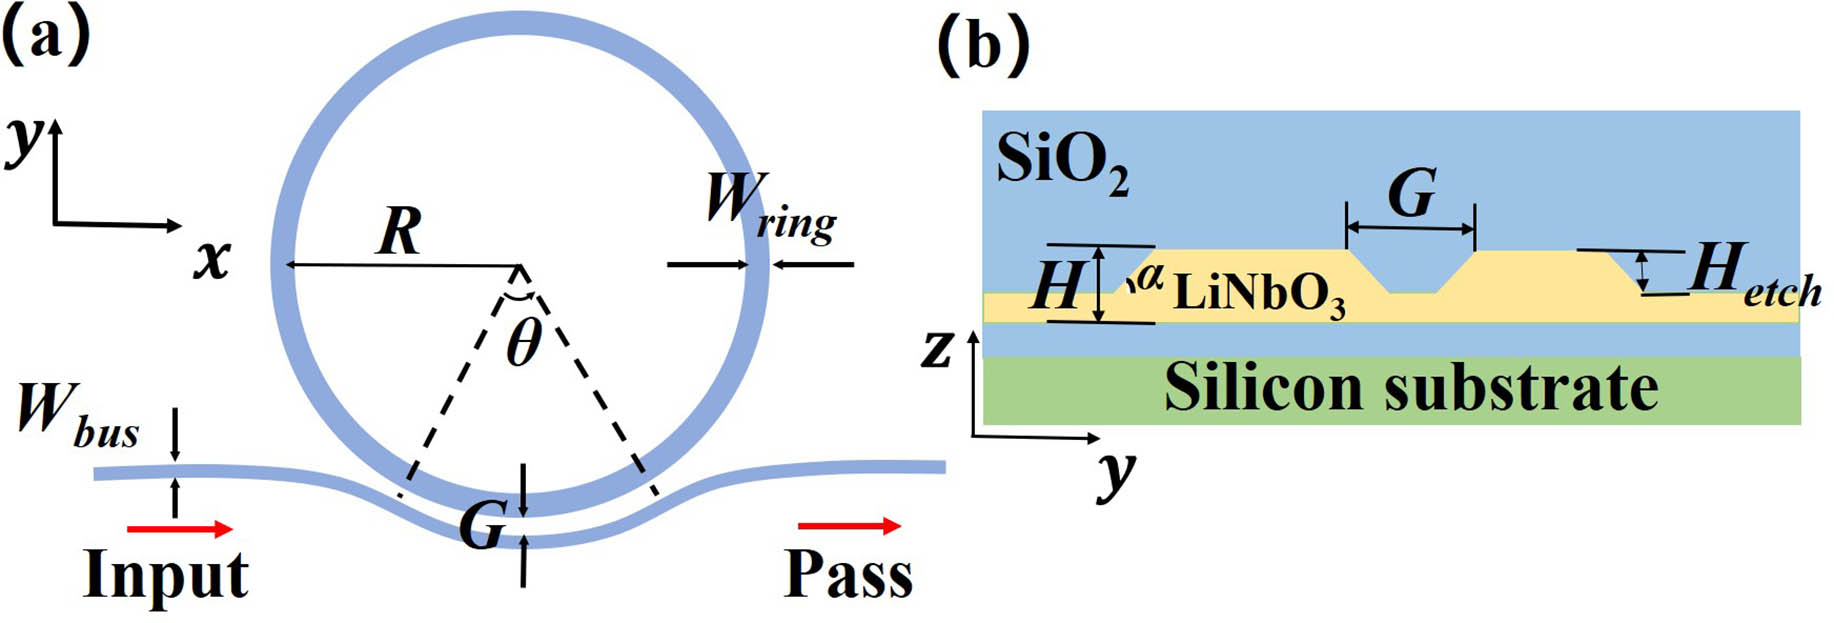 (a) Coupling structure from a pulley bus waveguide to a ring resonator; (b) cross section of the coupling system composed of the pulley bus waveguide and the microring resonator; θ corresponds to the angle of the interaction part between the two curved waveguides. R represents the radius of the microring. Wring and Wbus represent the width of the ring and the bus waveguide, respectively. H represents the thickness of the structure. Hetch represents the etching depth. G represents the distance between the microring and the waveguide. α represents the inclination of the waveguide.